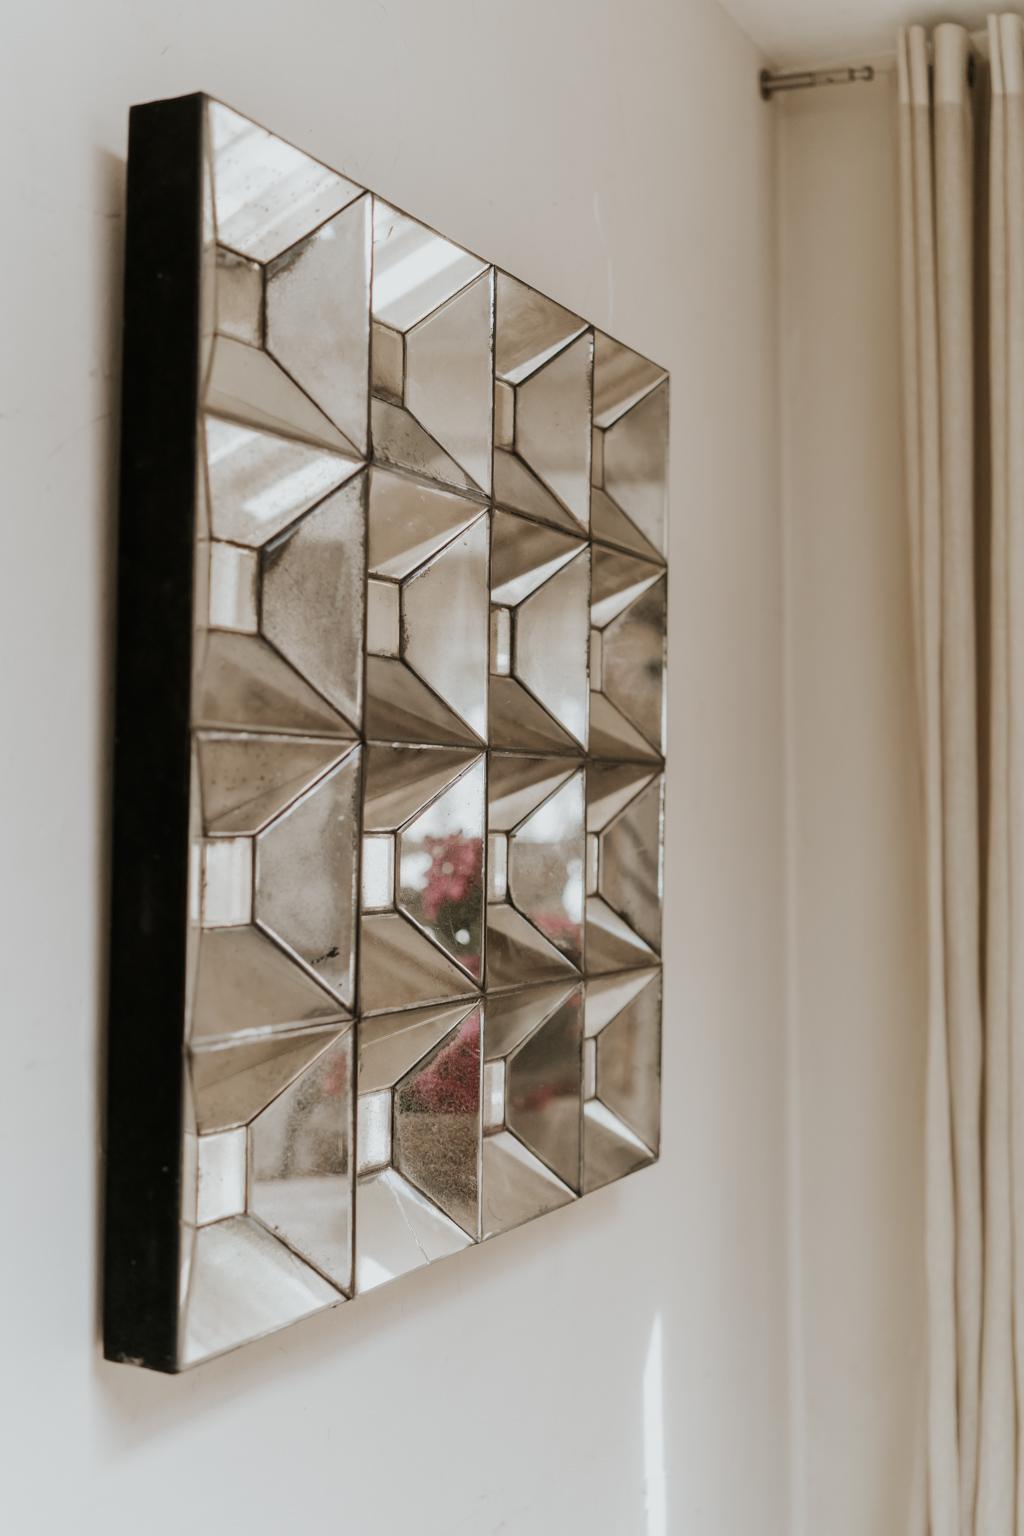 Made for a hotel in the 1980s in Spain, this mirror does it well every interior, classic or modern.